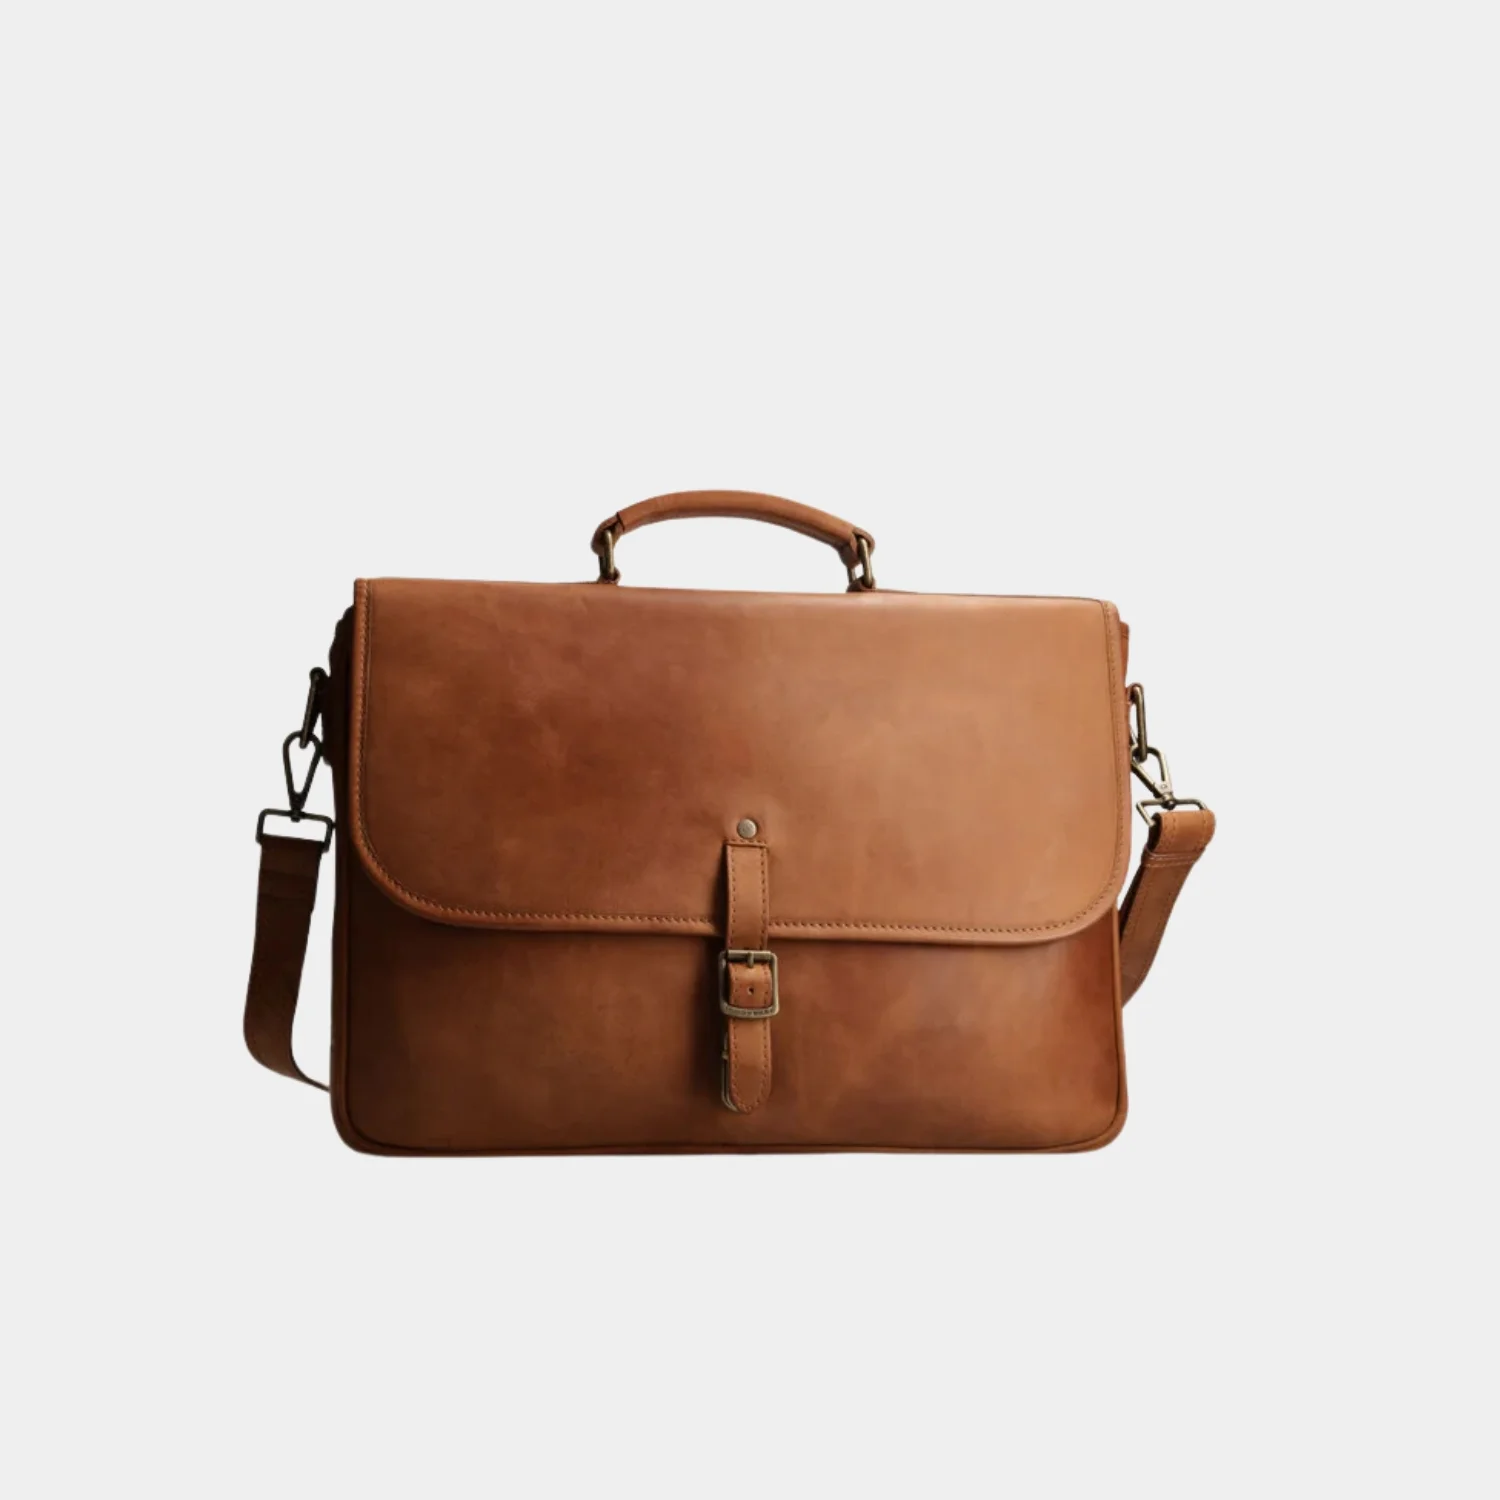 Buy Classy Tan Brown Leather Laptop Messenger Briefcase Bag